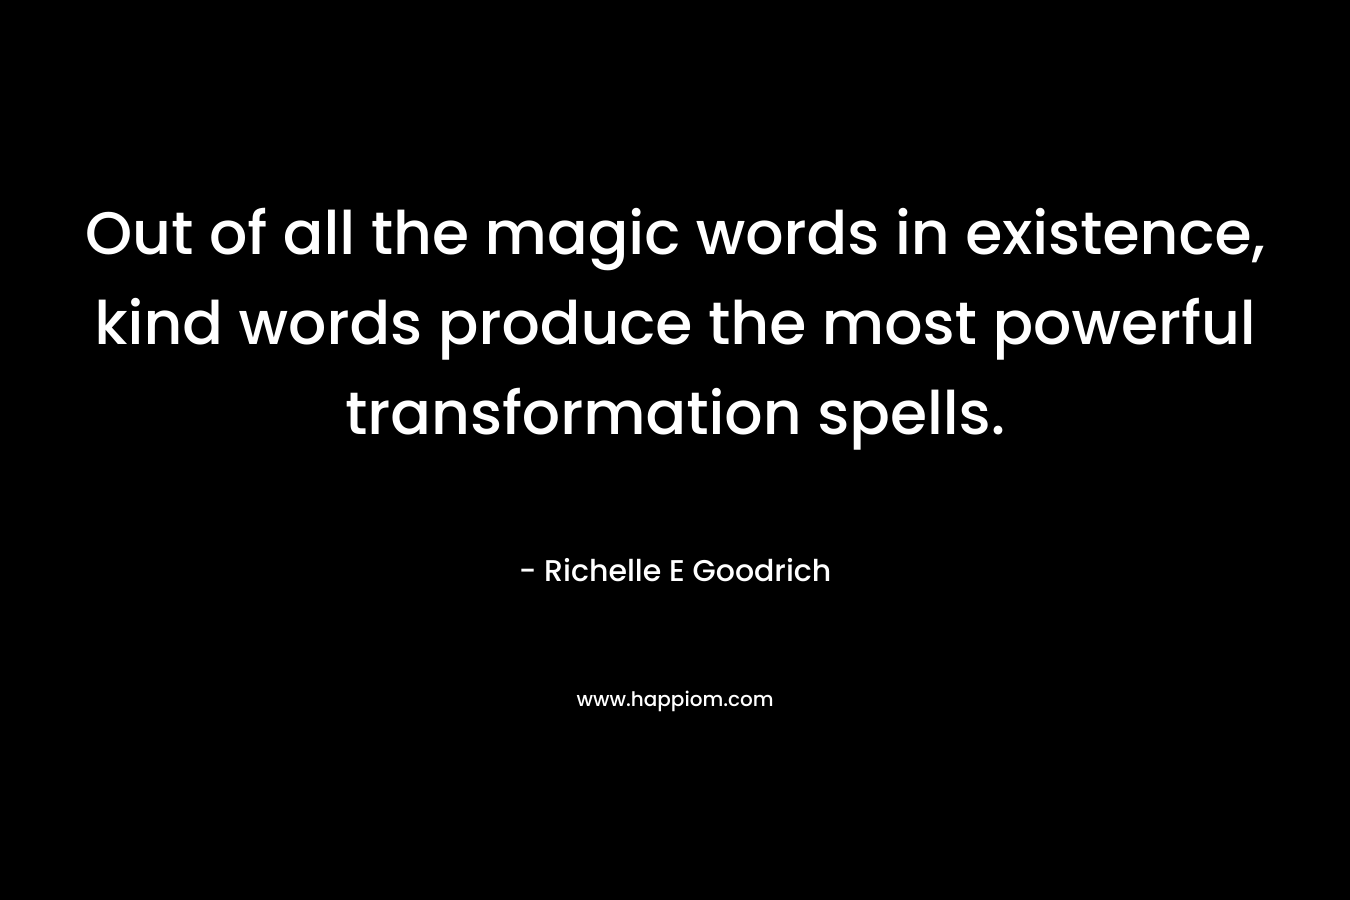 Out of all the magic words in existence, kind words produce the most powerful transformation spells.